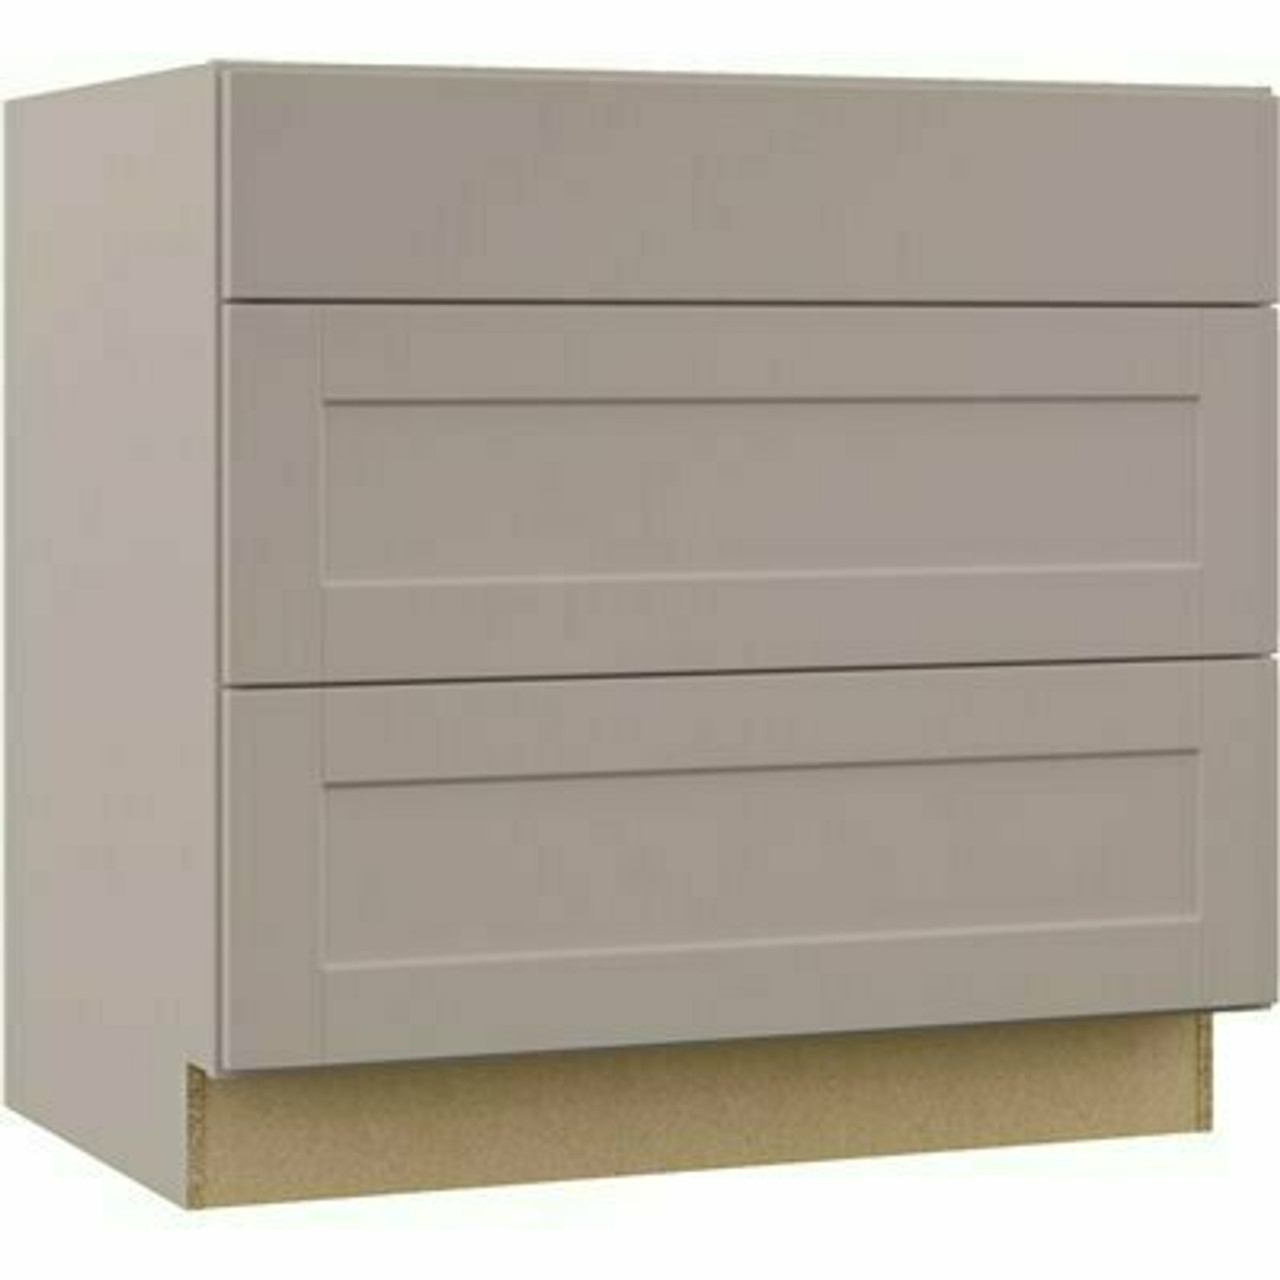 Hampton Bay Shaker Dove Gray Stock Assembled Pots And Pans Drawer Base Kitchen Cabinet (36 In. X 34.5 In. X 24 In.)